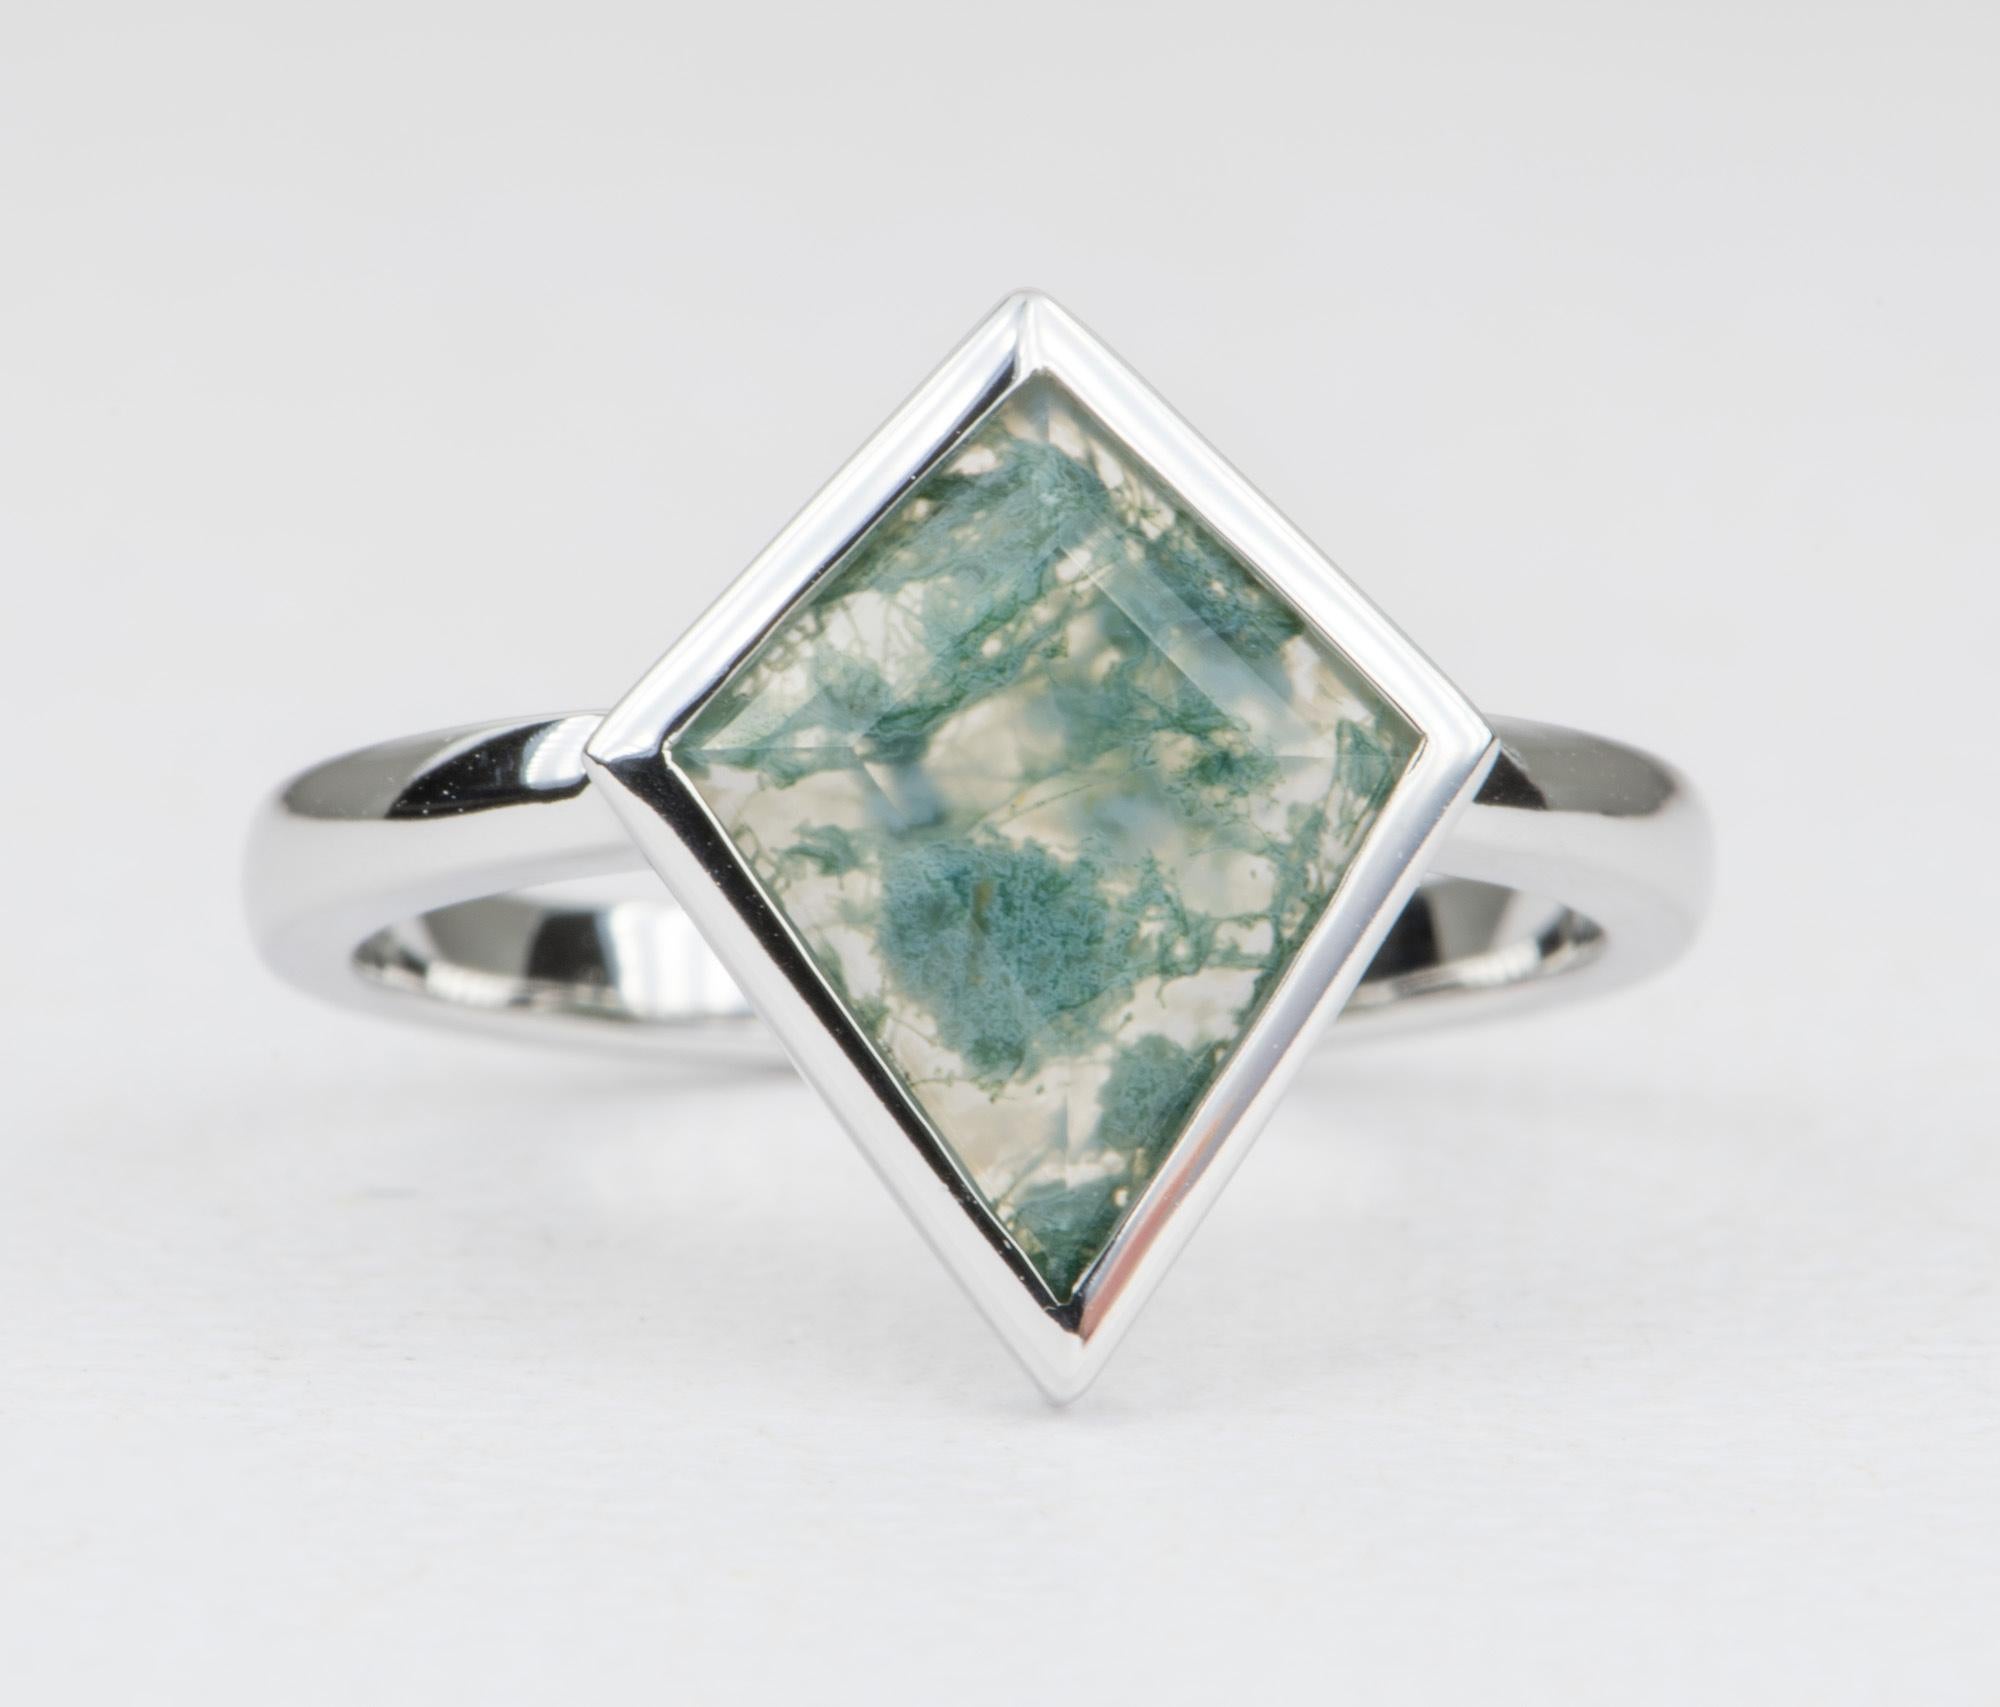 ♥ A stunning 14k white gold kite-shape moss agate bezel set engagement ring.
♥ Low profile setting.
♥ The ring head is 14.9mm long x 12.1mm wide. 

♥  Ring size: US Size 6.5 (Free resizing up or down one size)
♥  Band width: 2.1mm
♥  Gemstone: